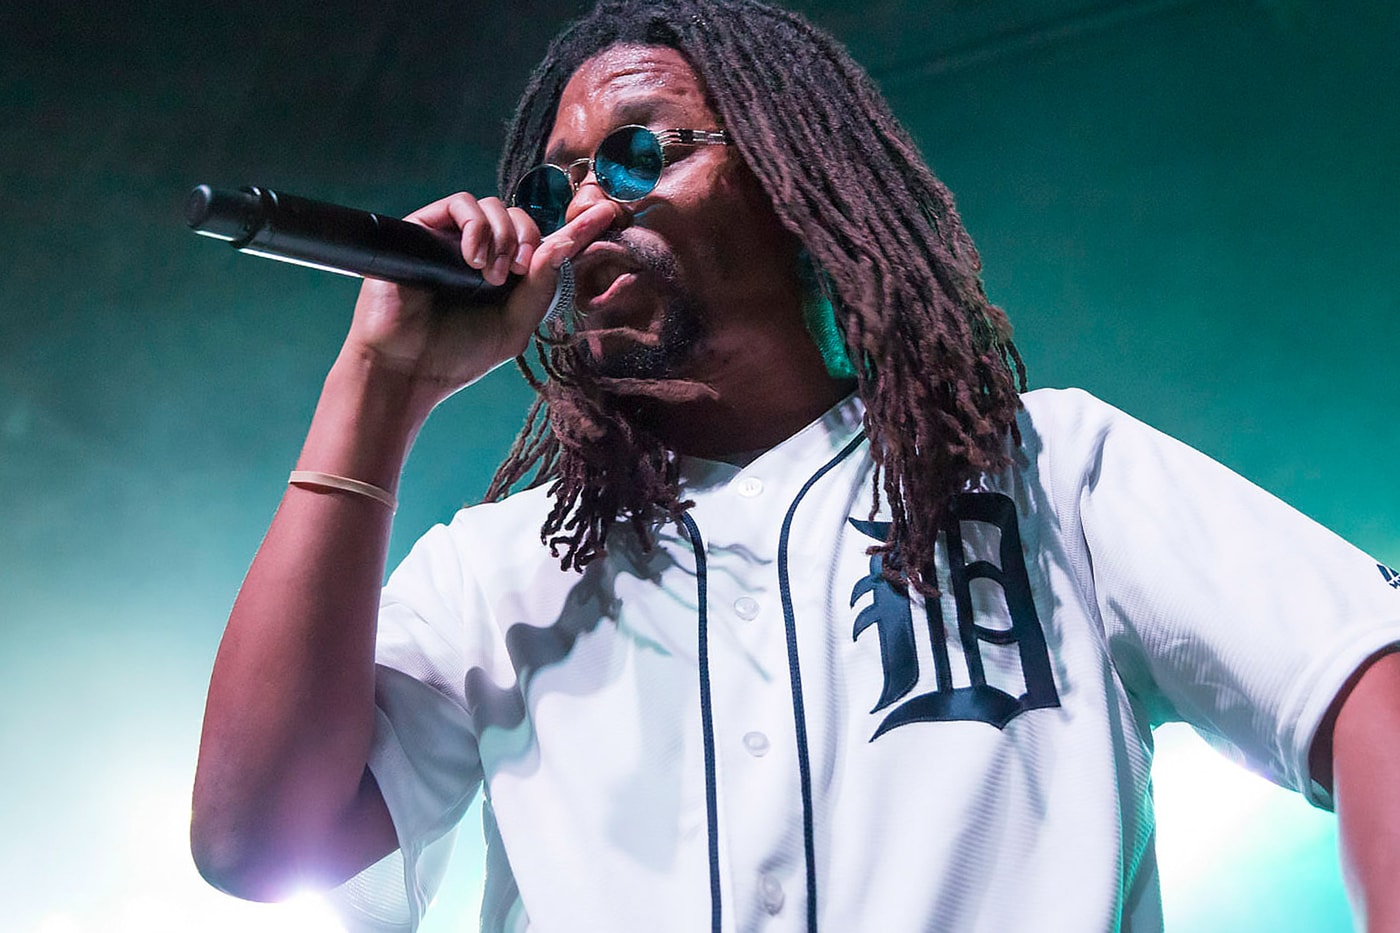 Lupe Fiasco "Coulda Been" Single